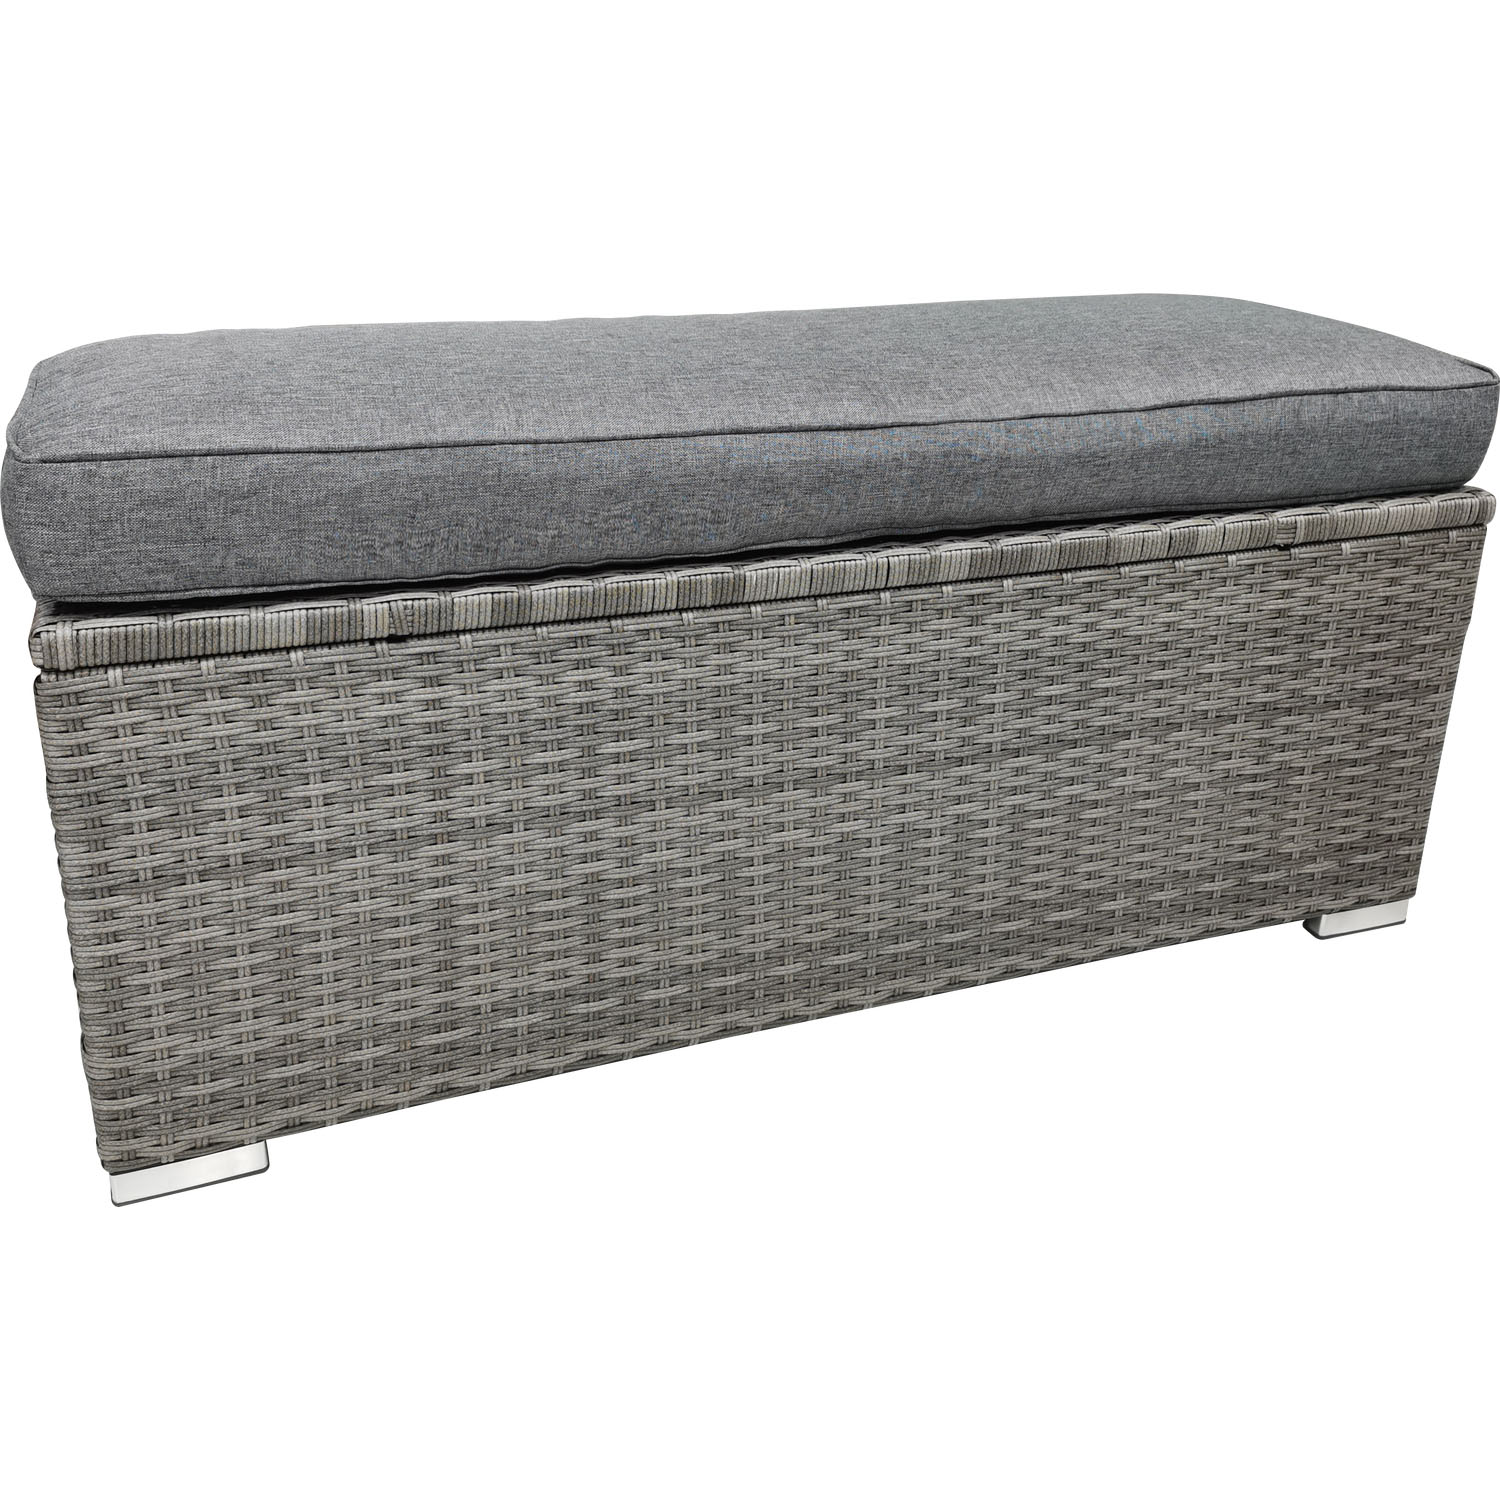 Malay Deluxe New Hampshire Grey Rattan Bench with Cushion Image 3